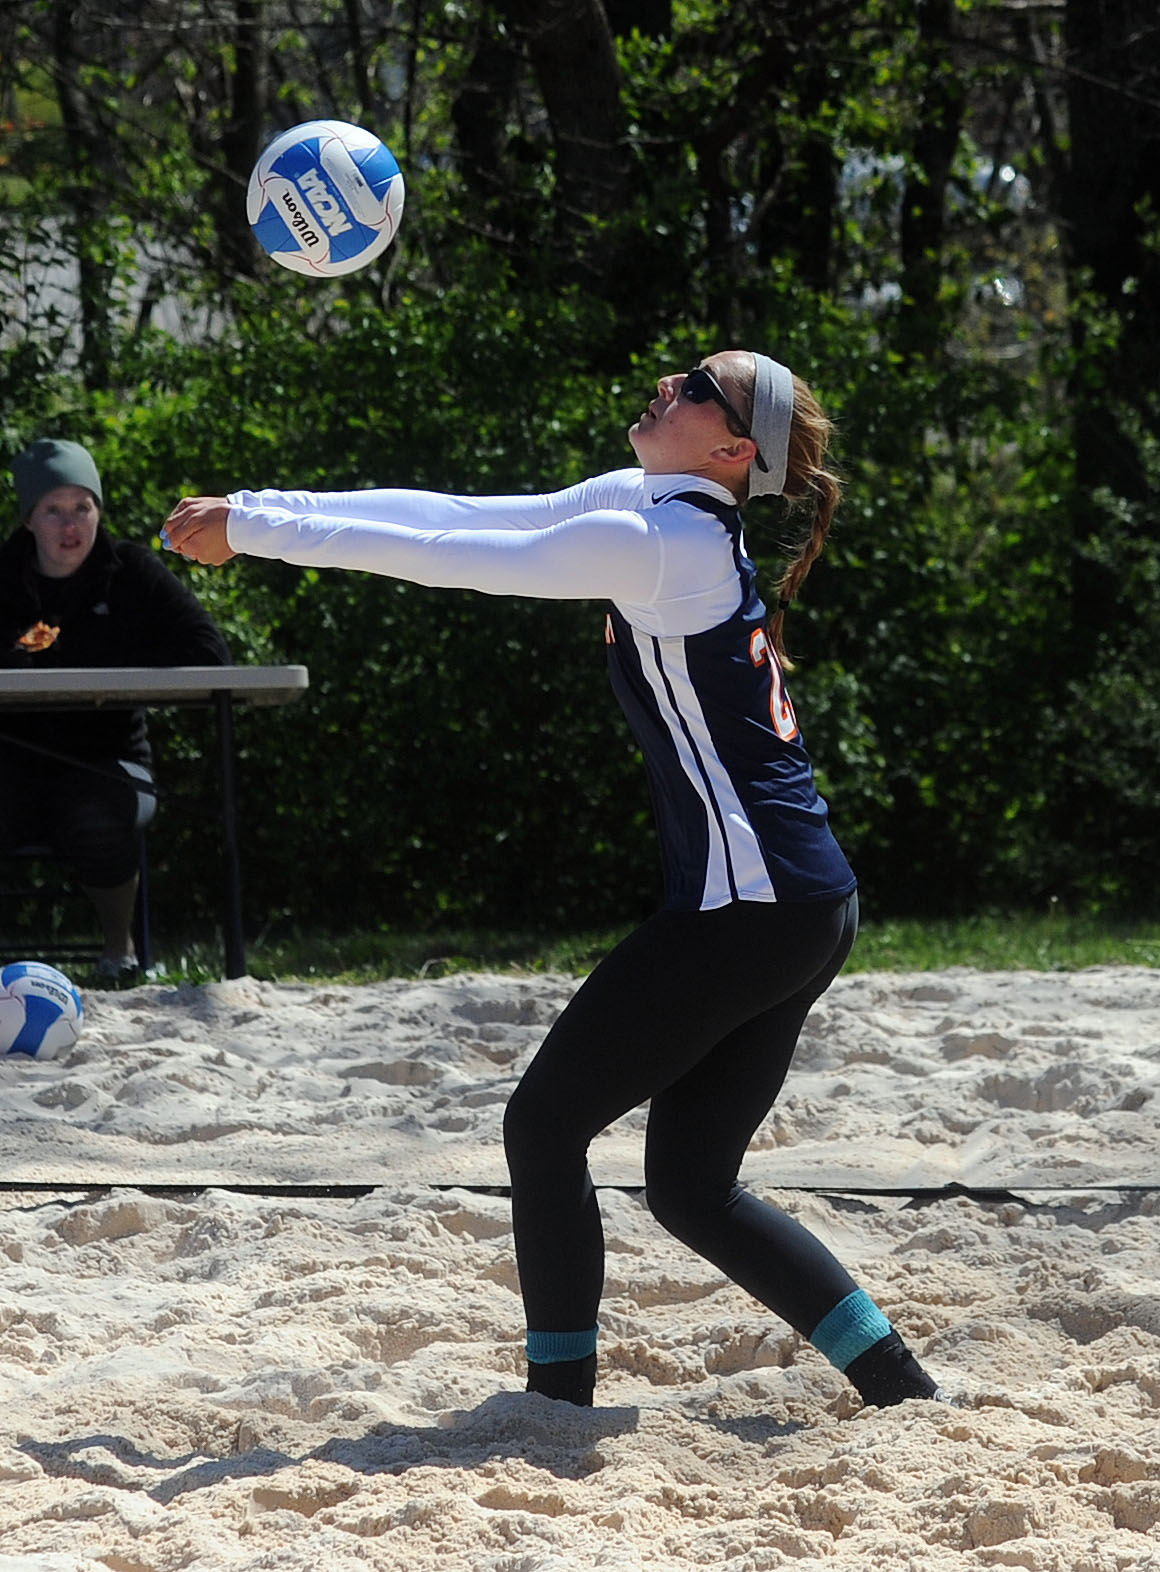 C-N concludes season with two more wins to sweep the Stevenson Sand Tournament